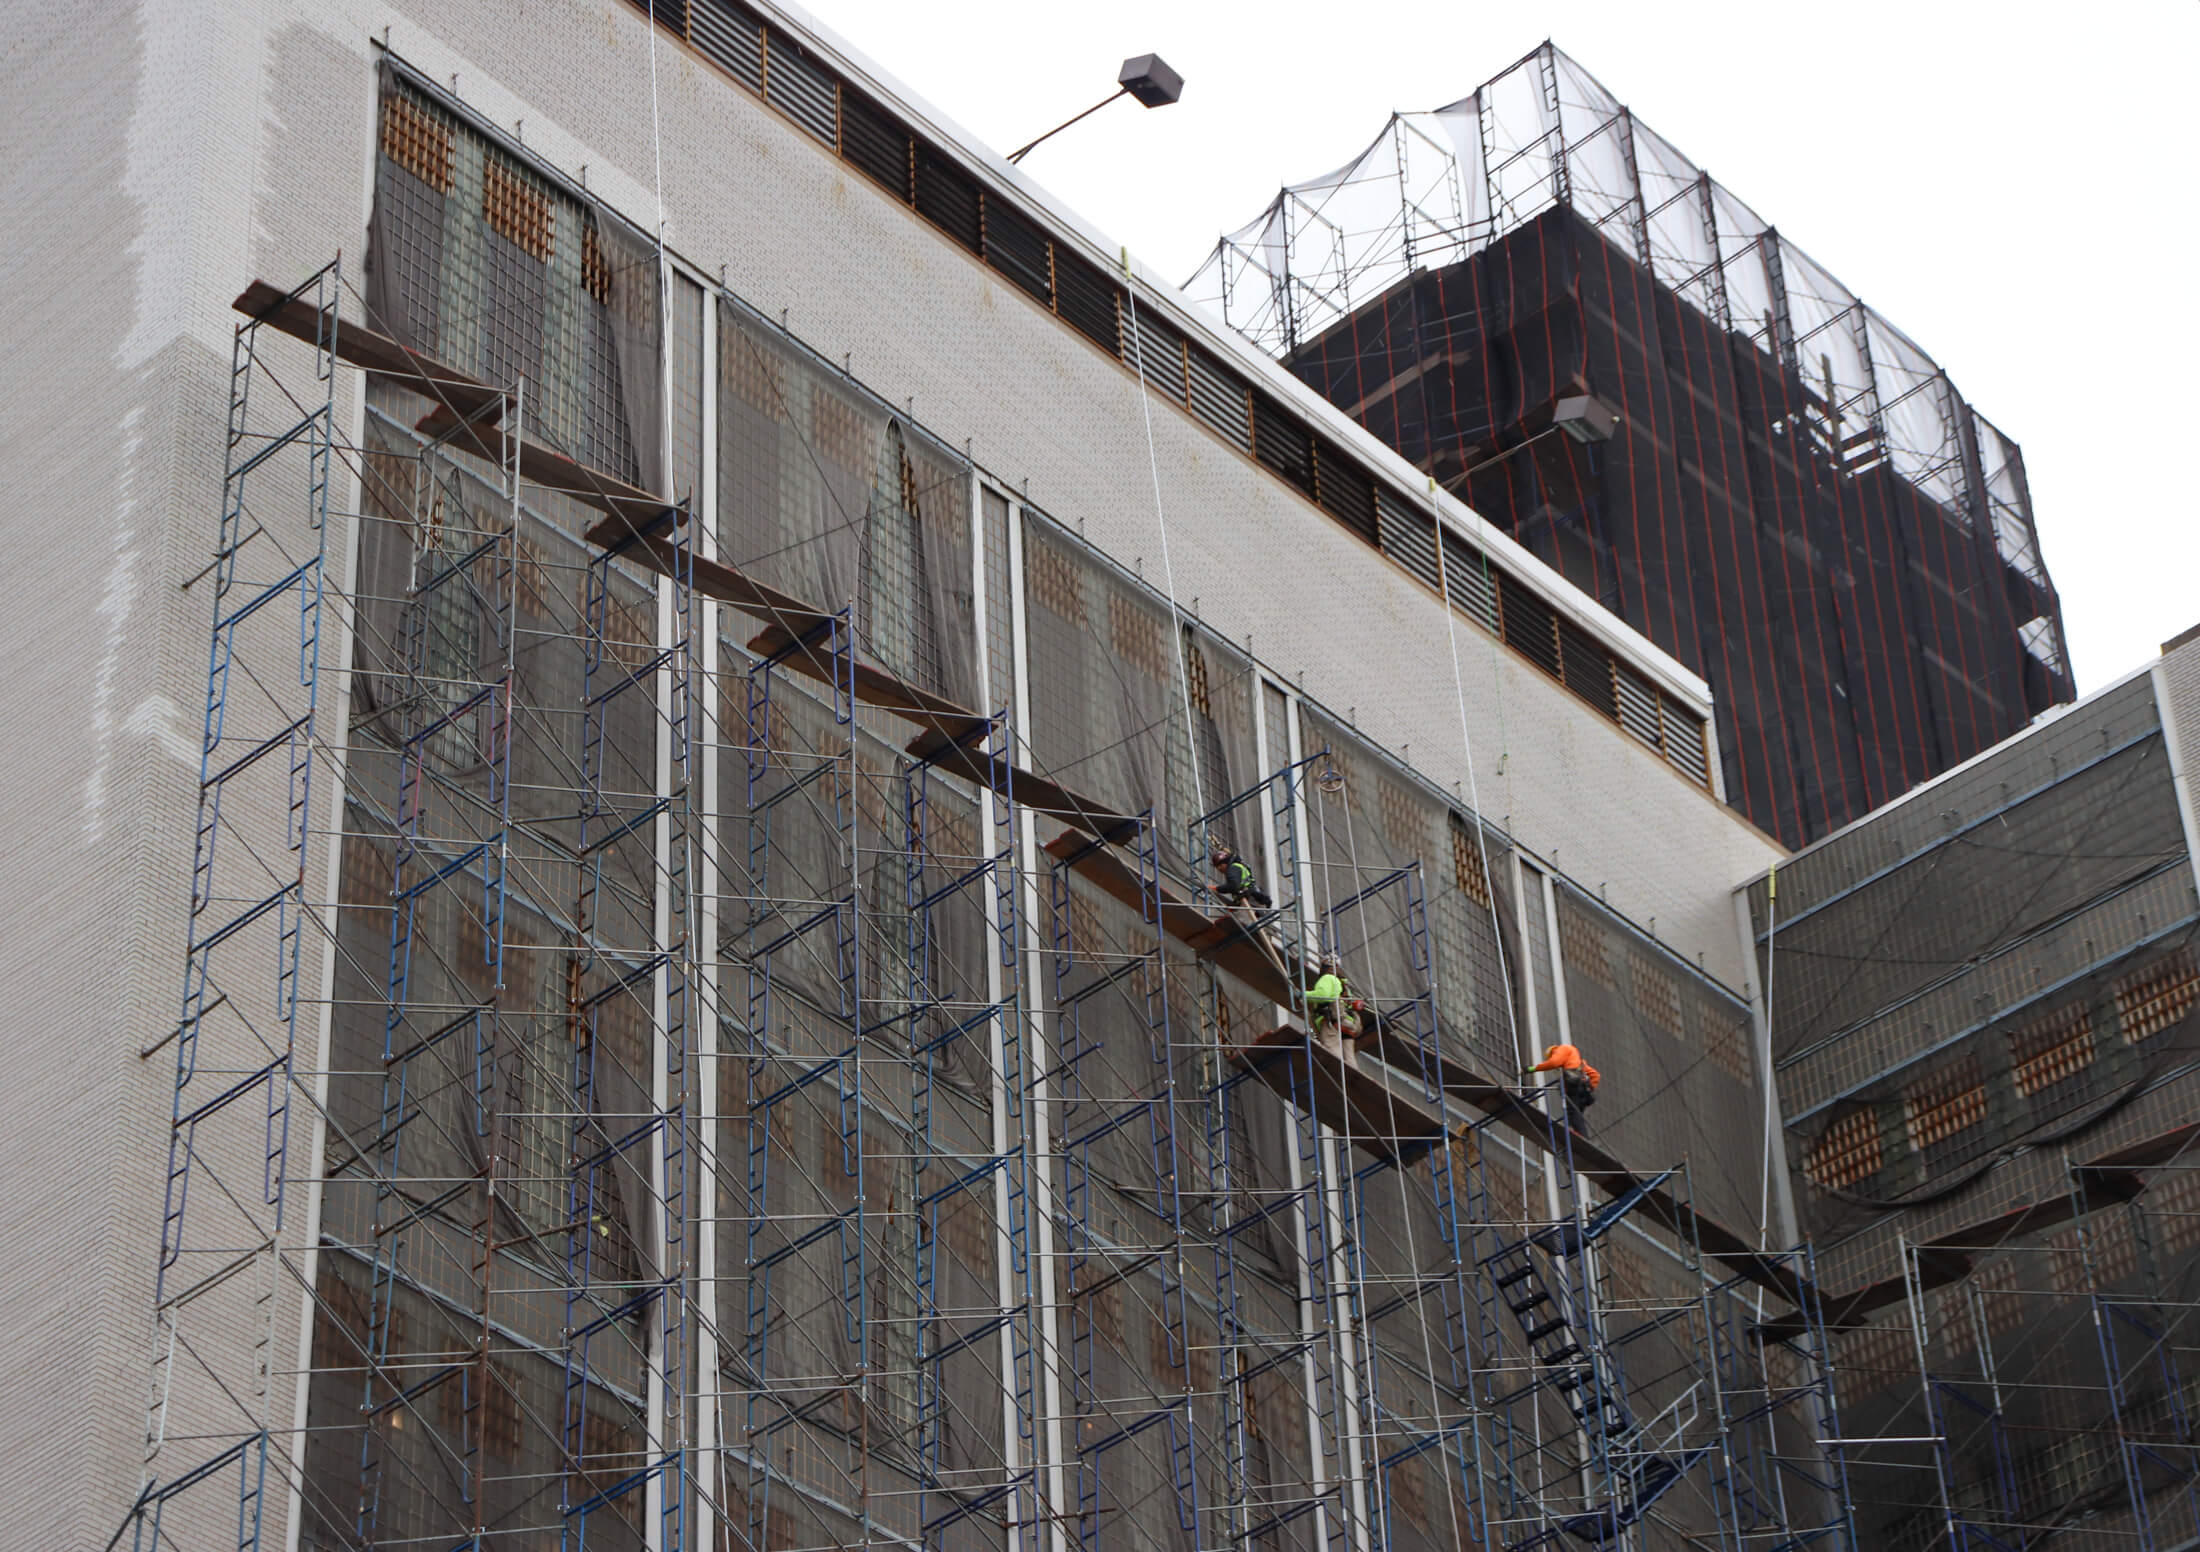 workers on scaffolding on the exterior of the Brooklyn House of Detention